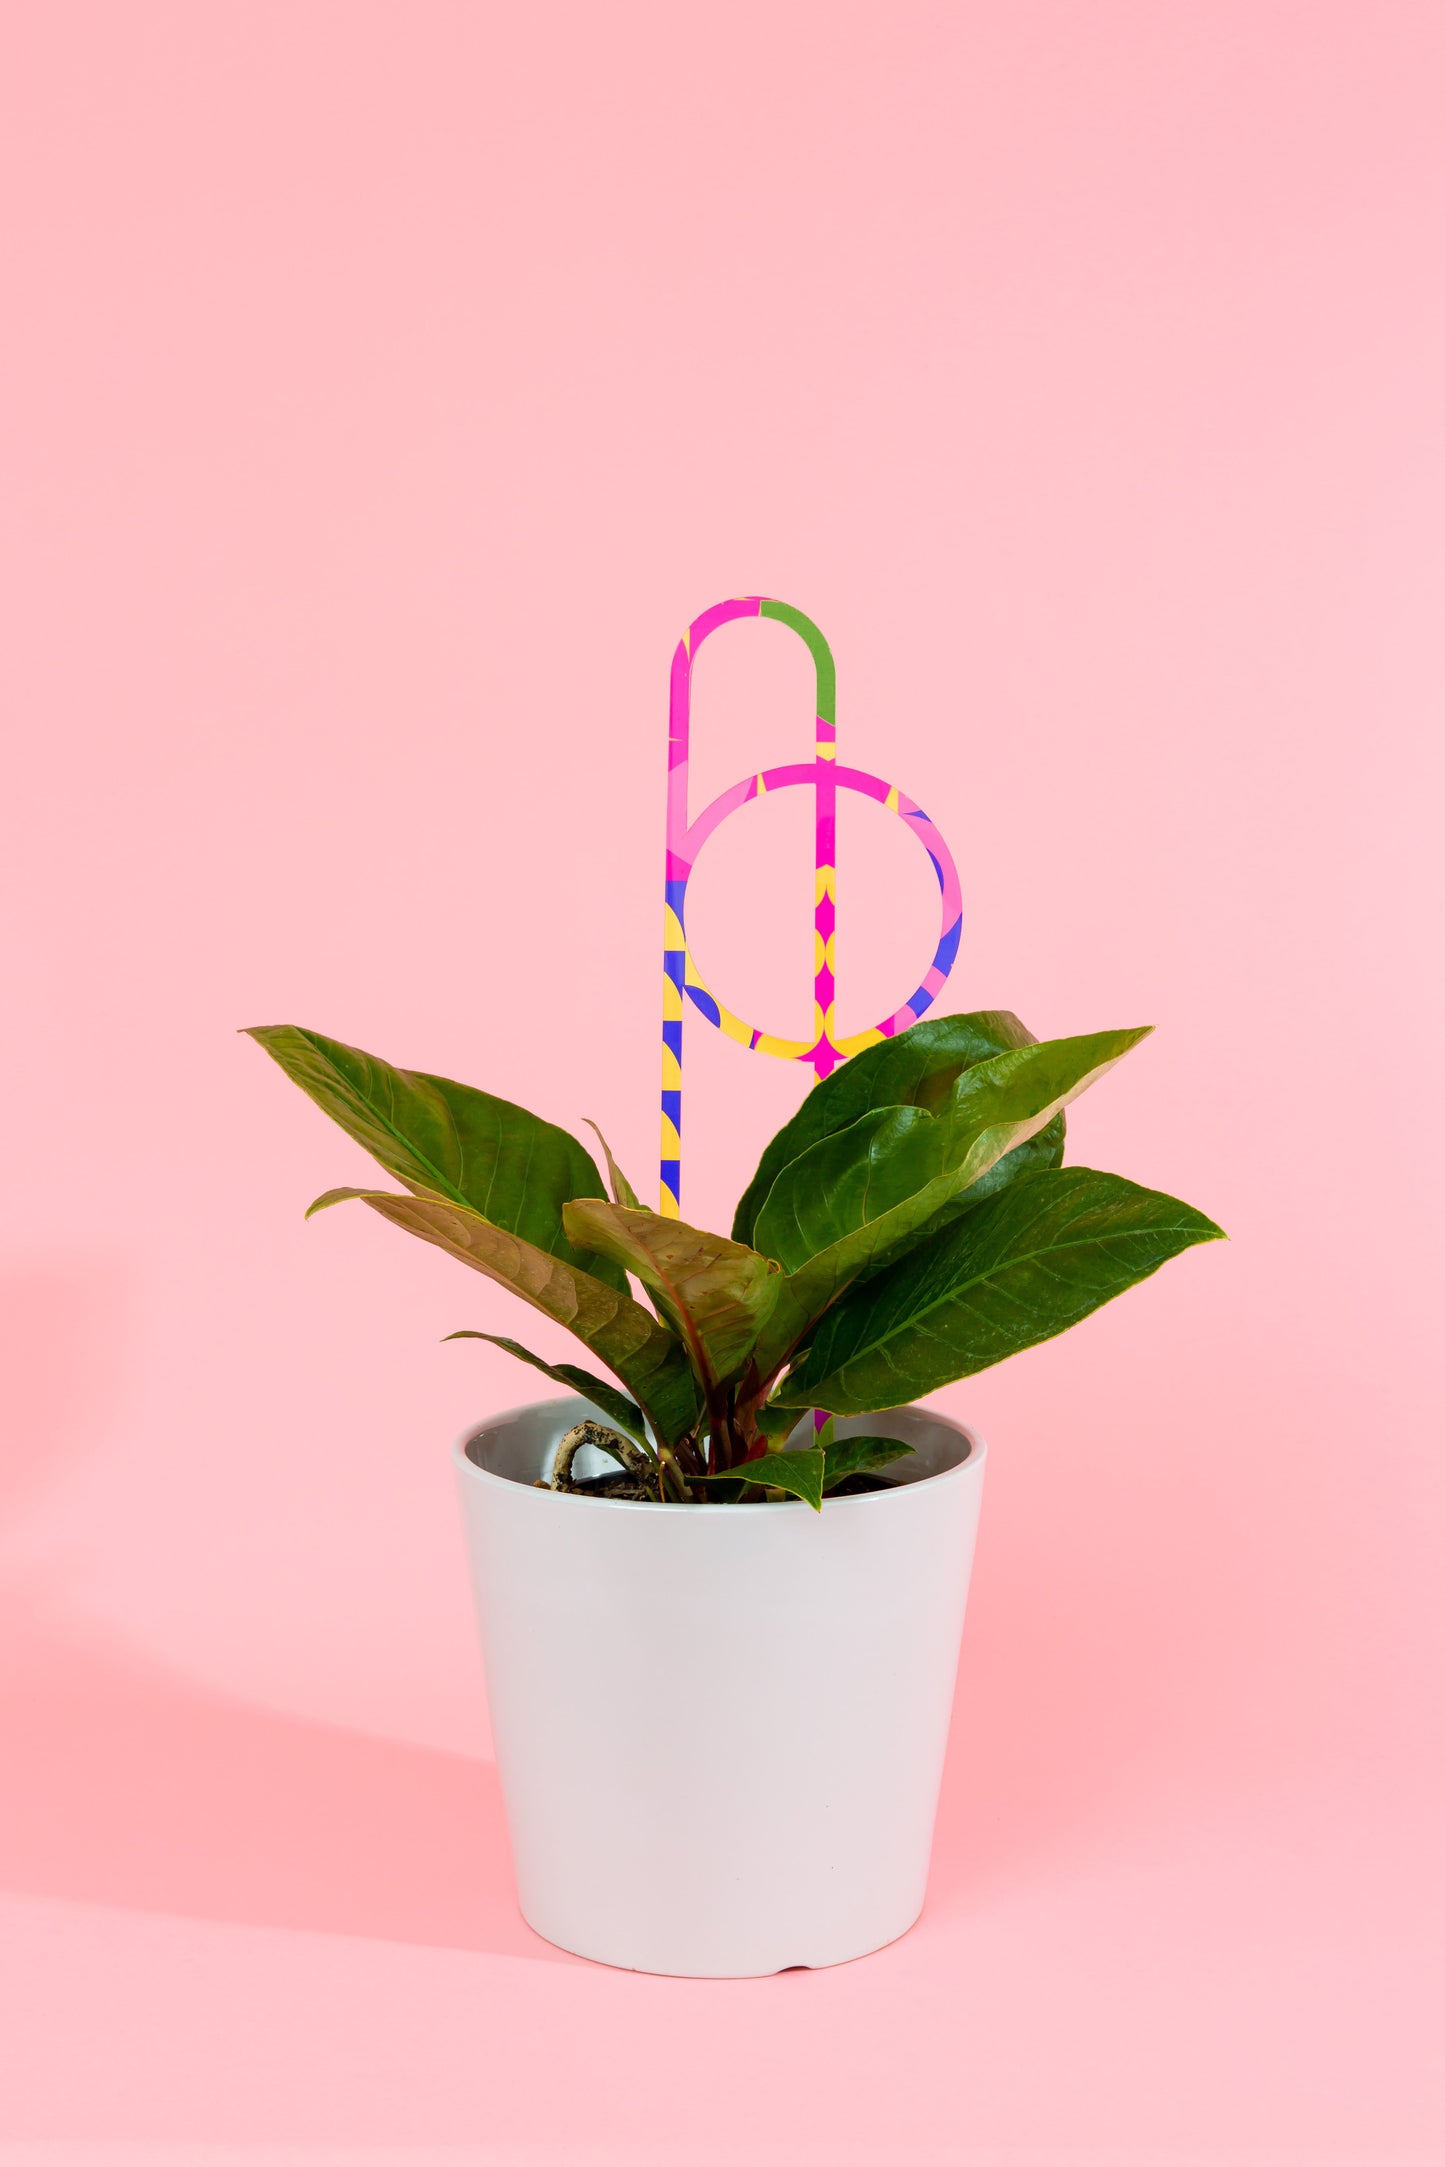 Acrylic Plant Stake 2 - Printed Large Bright Squiggle & Curve